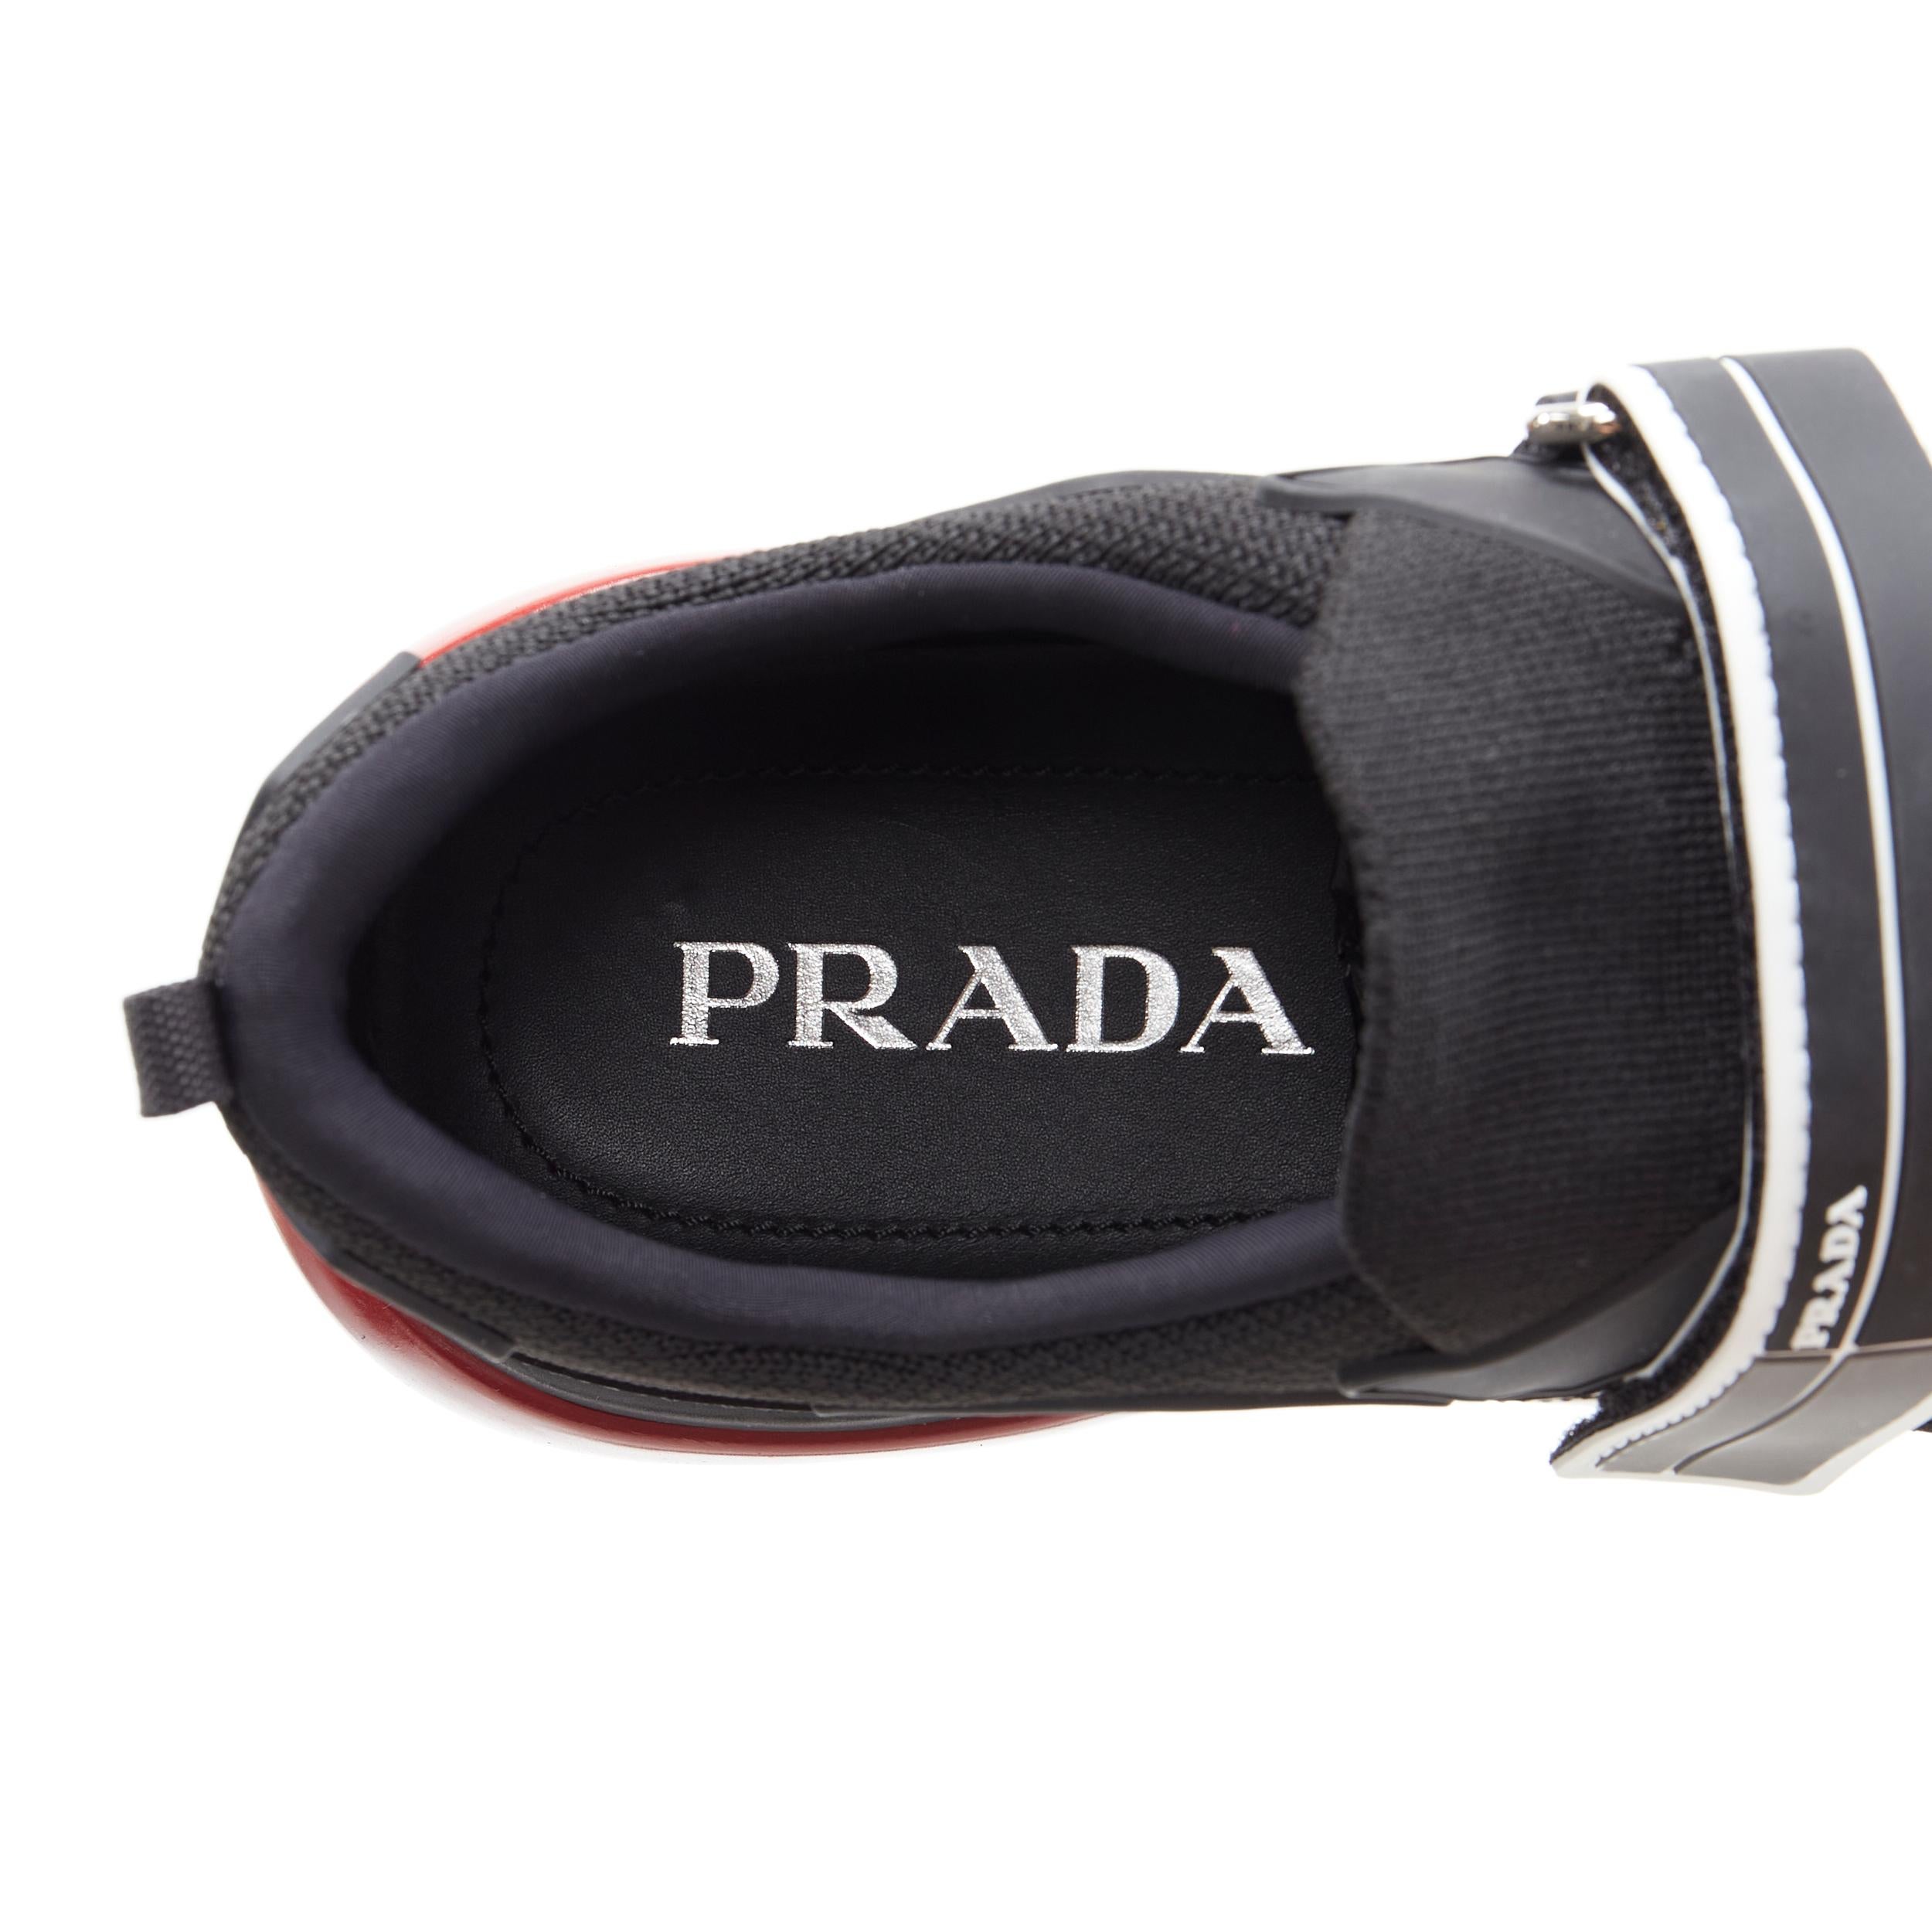 new PRADA Cloudbust black red logo rubber strapped low top sneakers UK7.5 US8.5 3